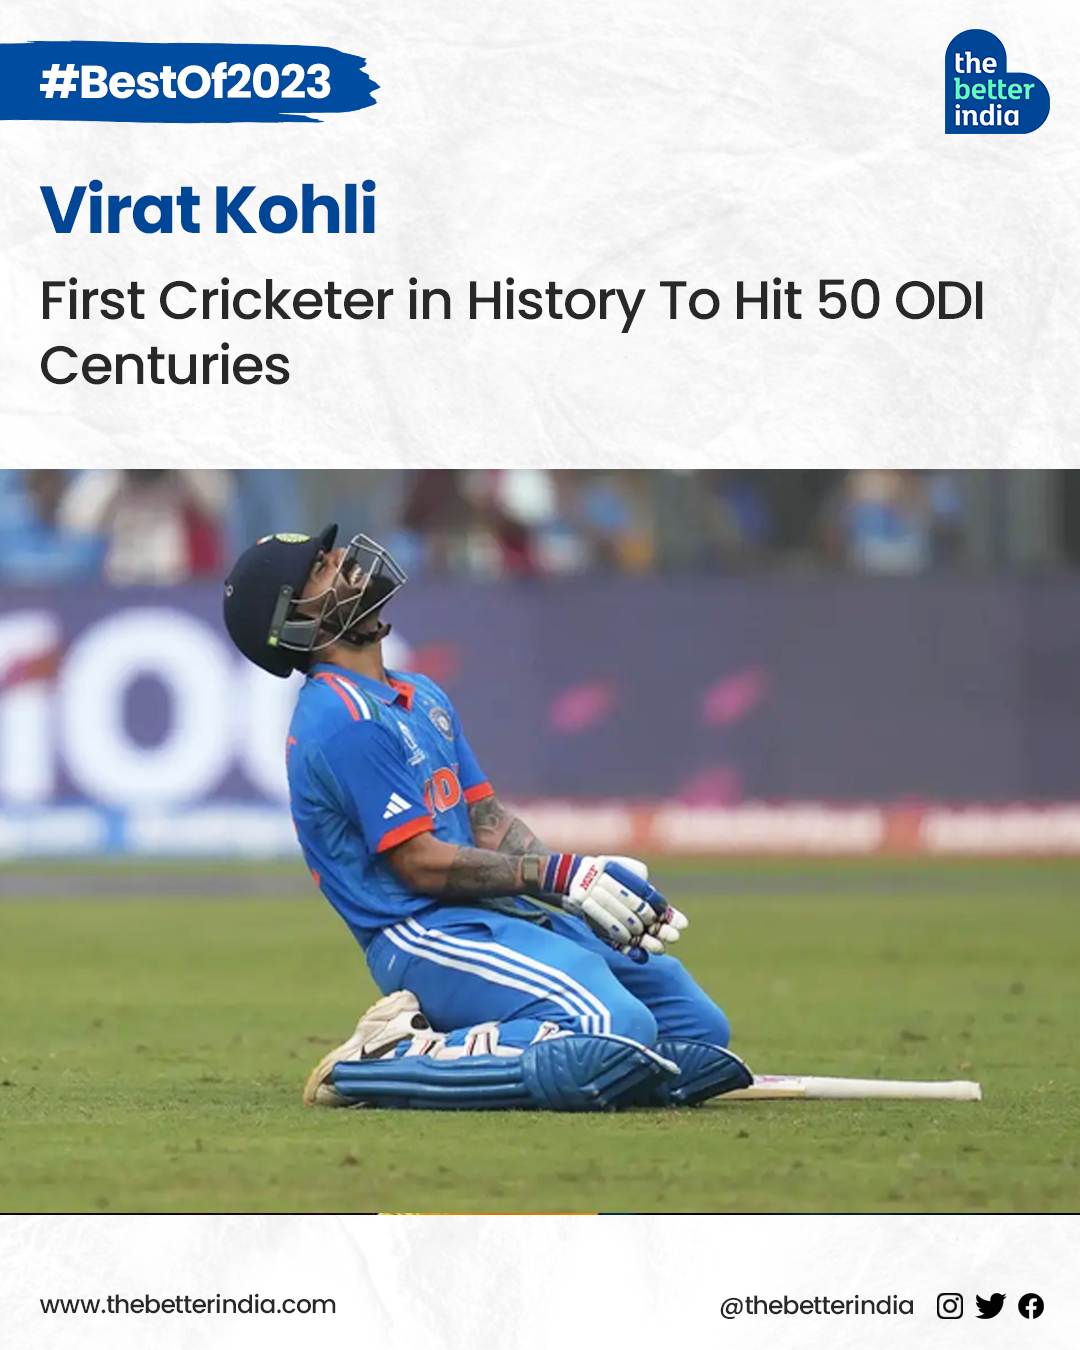 Virat Kohli became the first cricketer in history to hit 50 ODI centuries